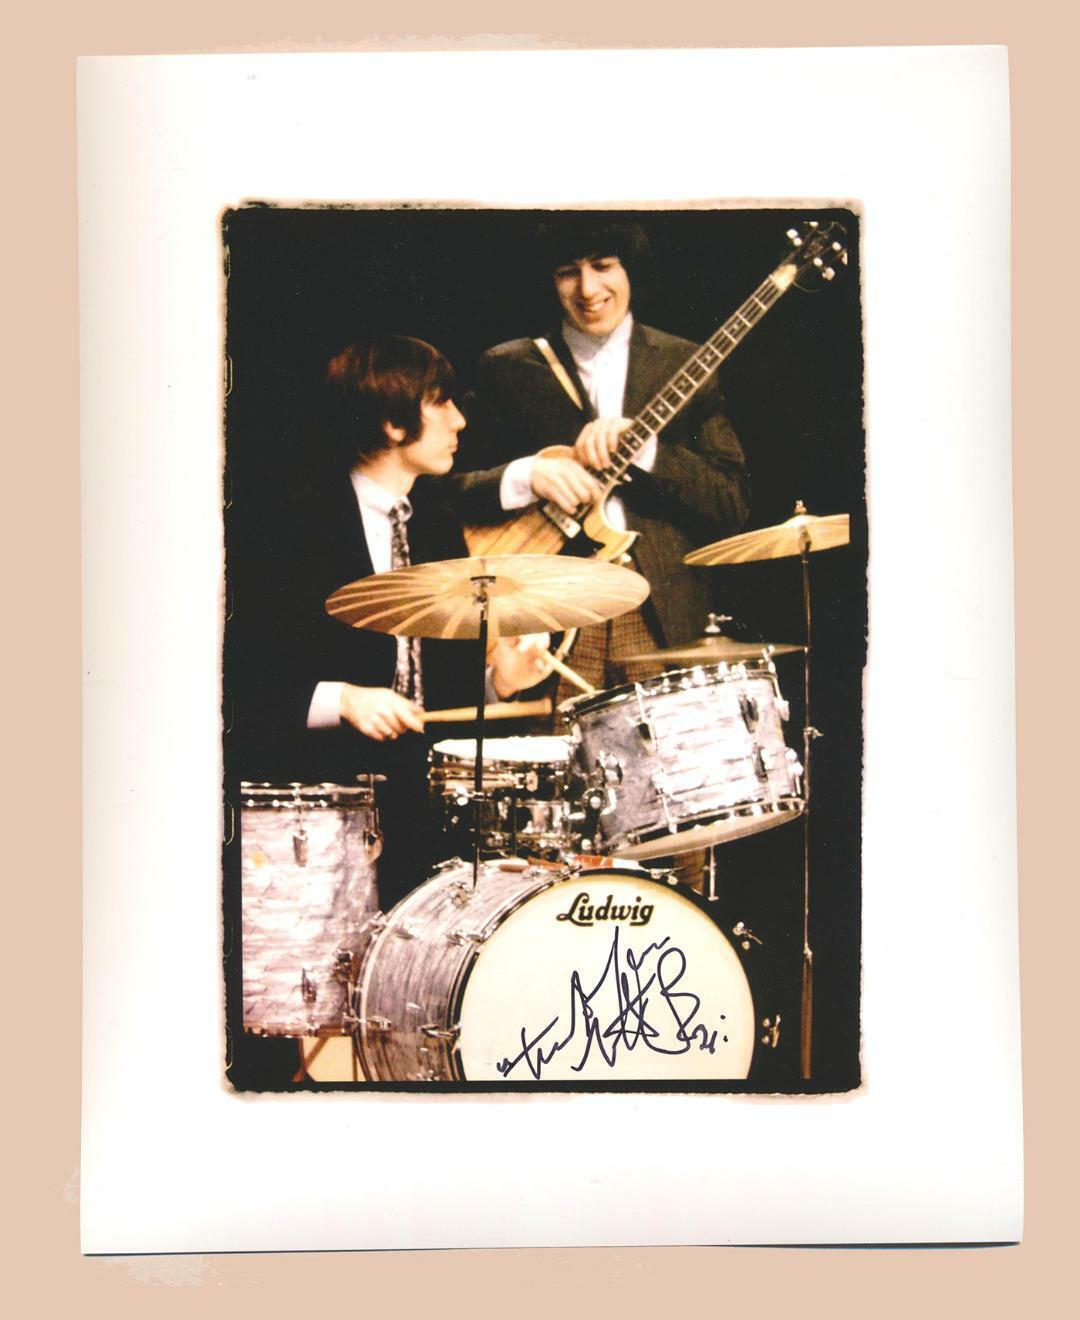 Charlie Watts Rolling Stones drummer REAL hand SIGNED Photo Poster painting #2 COA Autographed